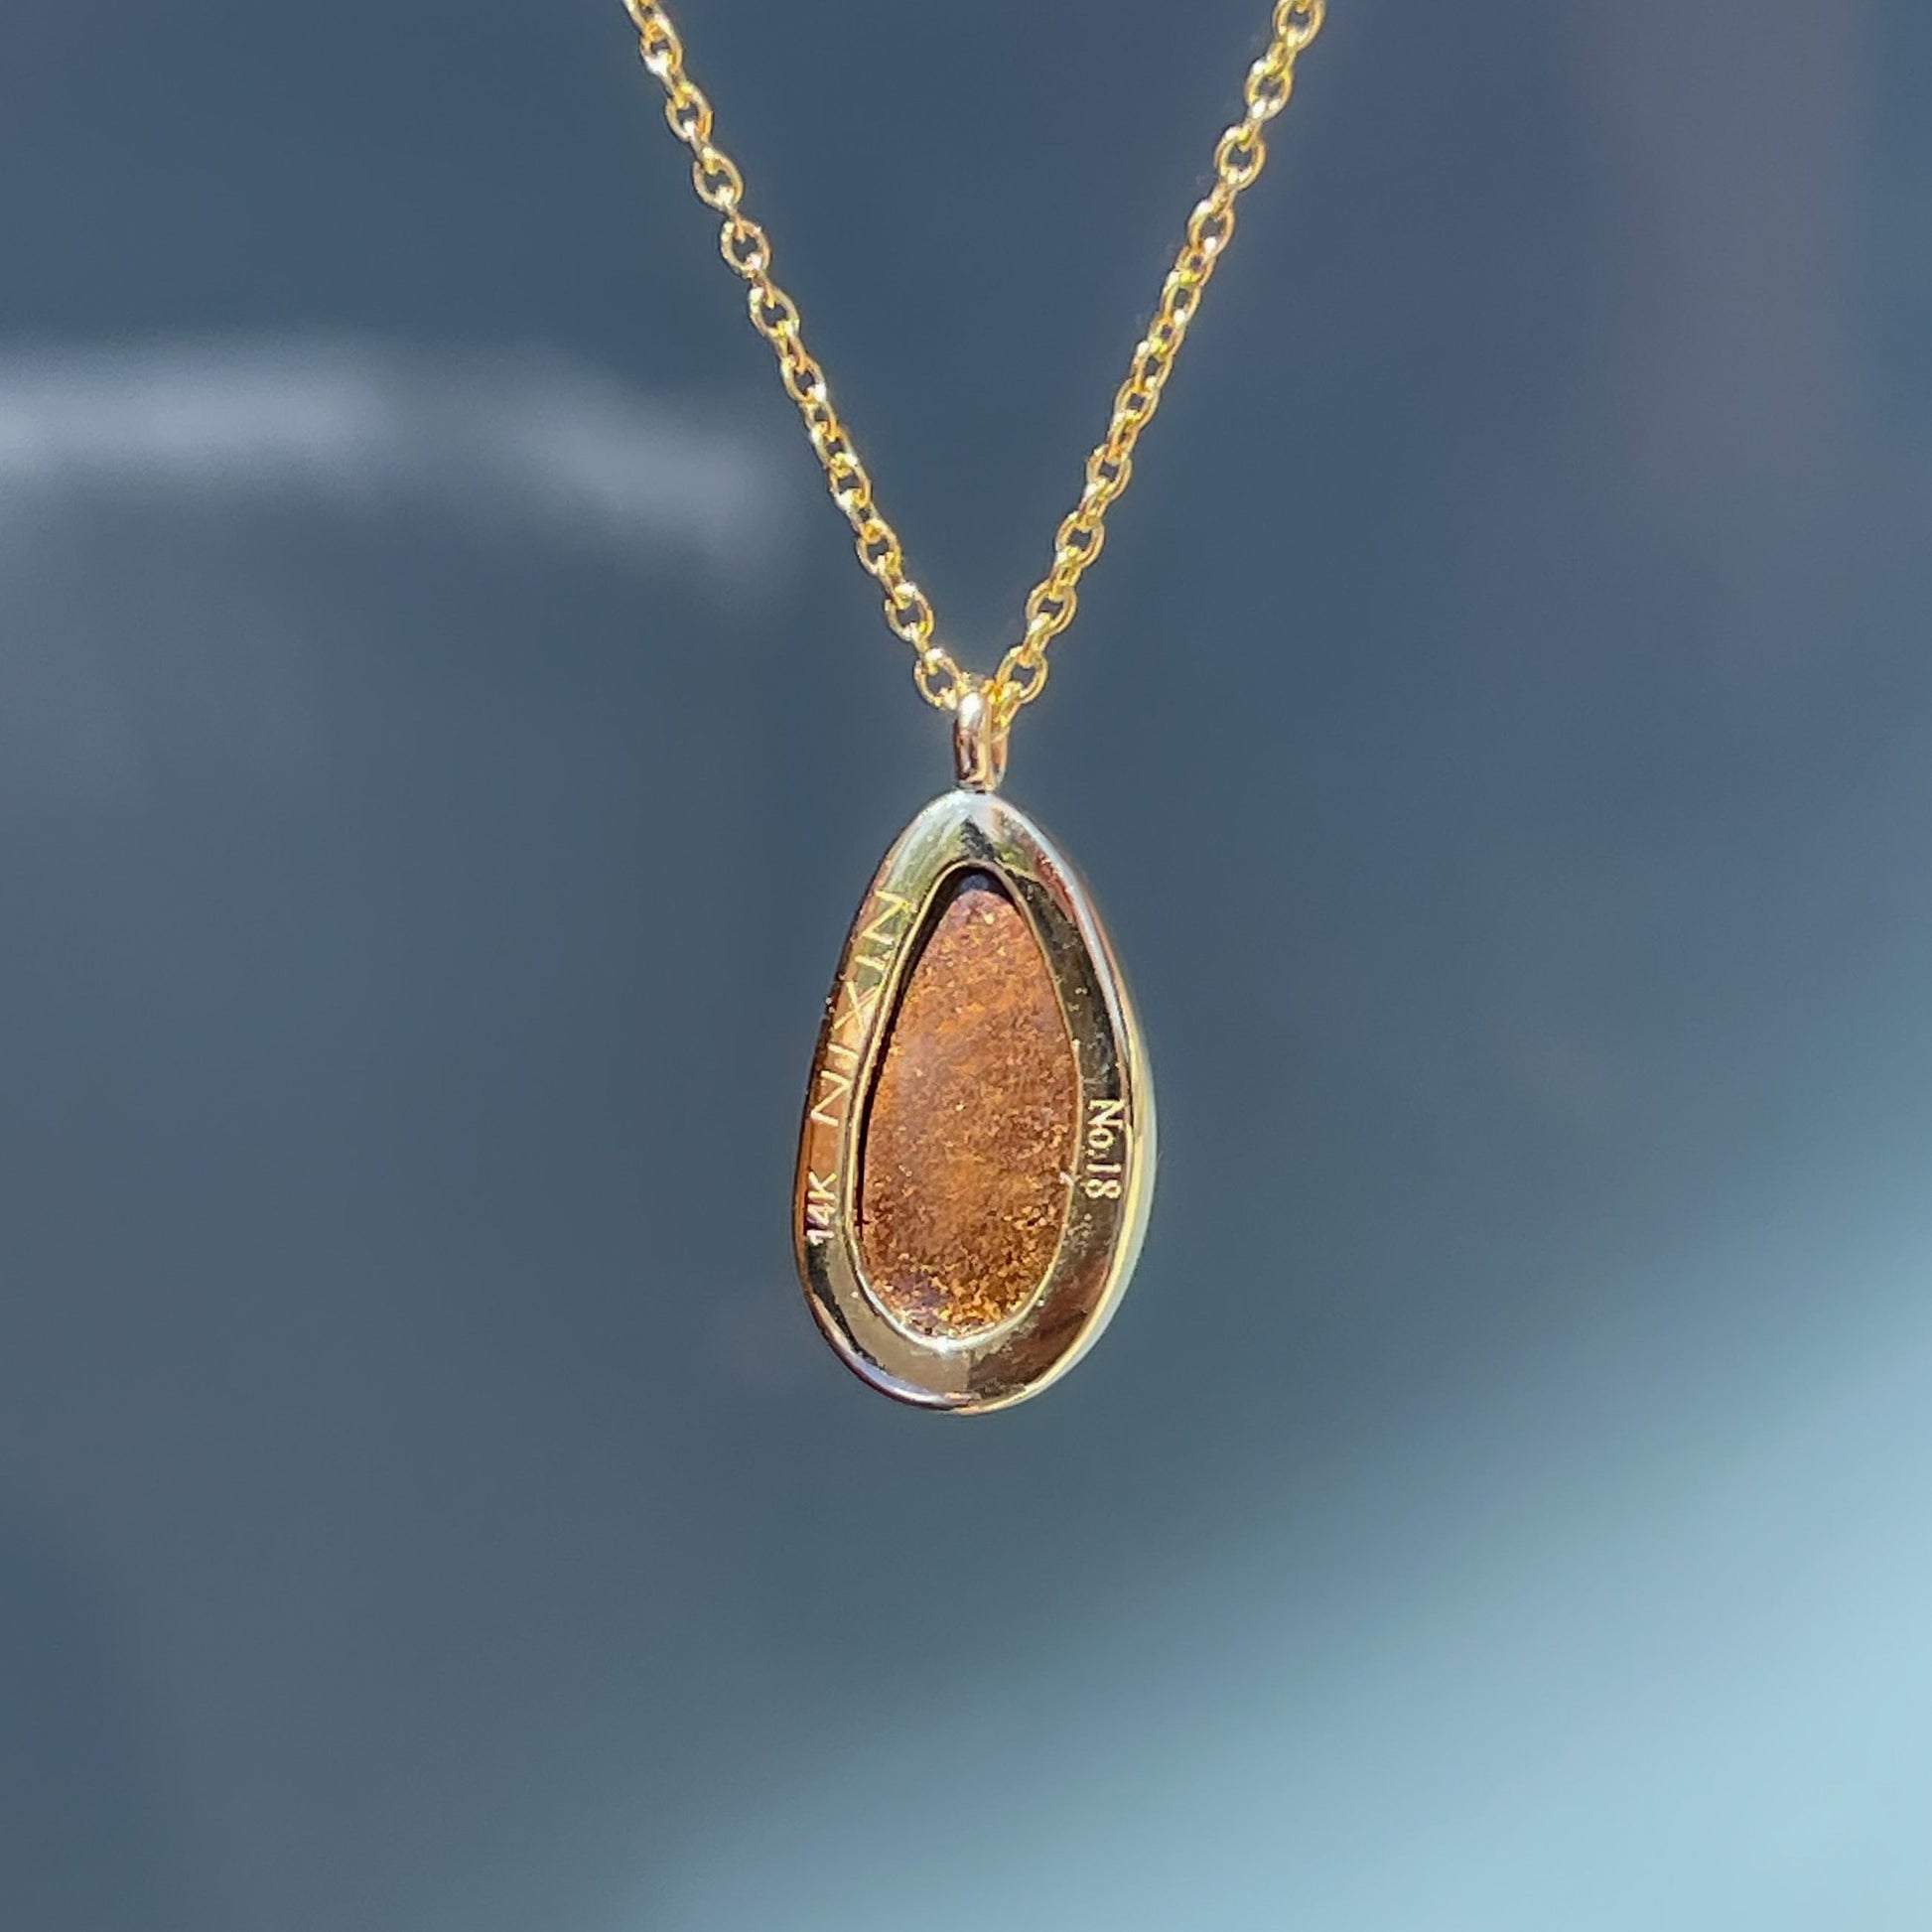 The back of an Australian Opal Necklace by NIXIN Jewelry. The photo shows the back of the gold bezel setting and the serial number of the limited edition engraved on the back.